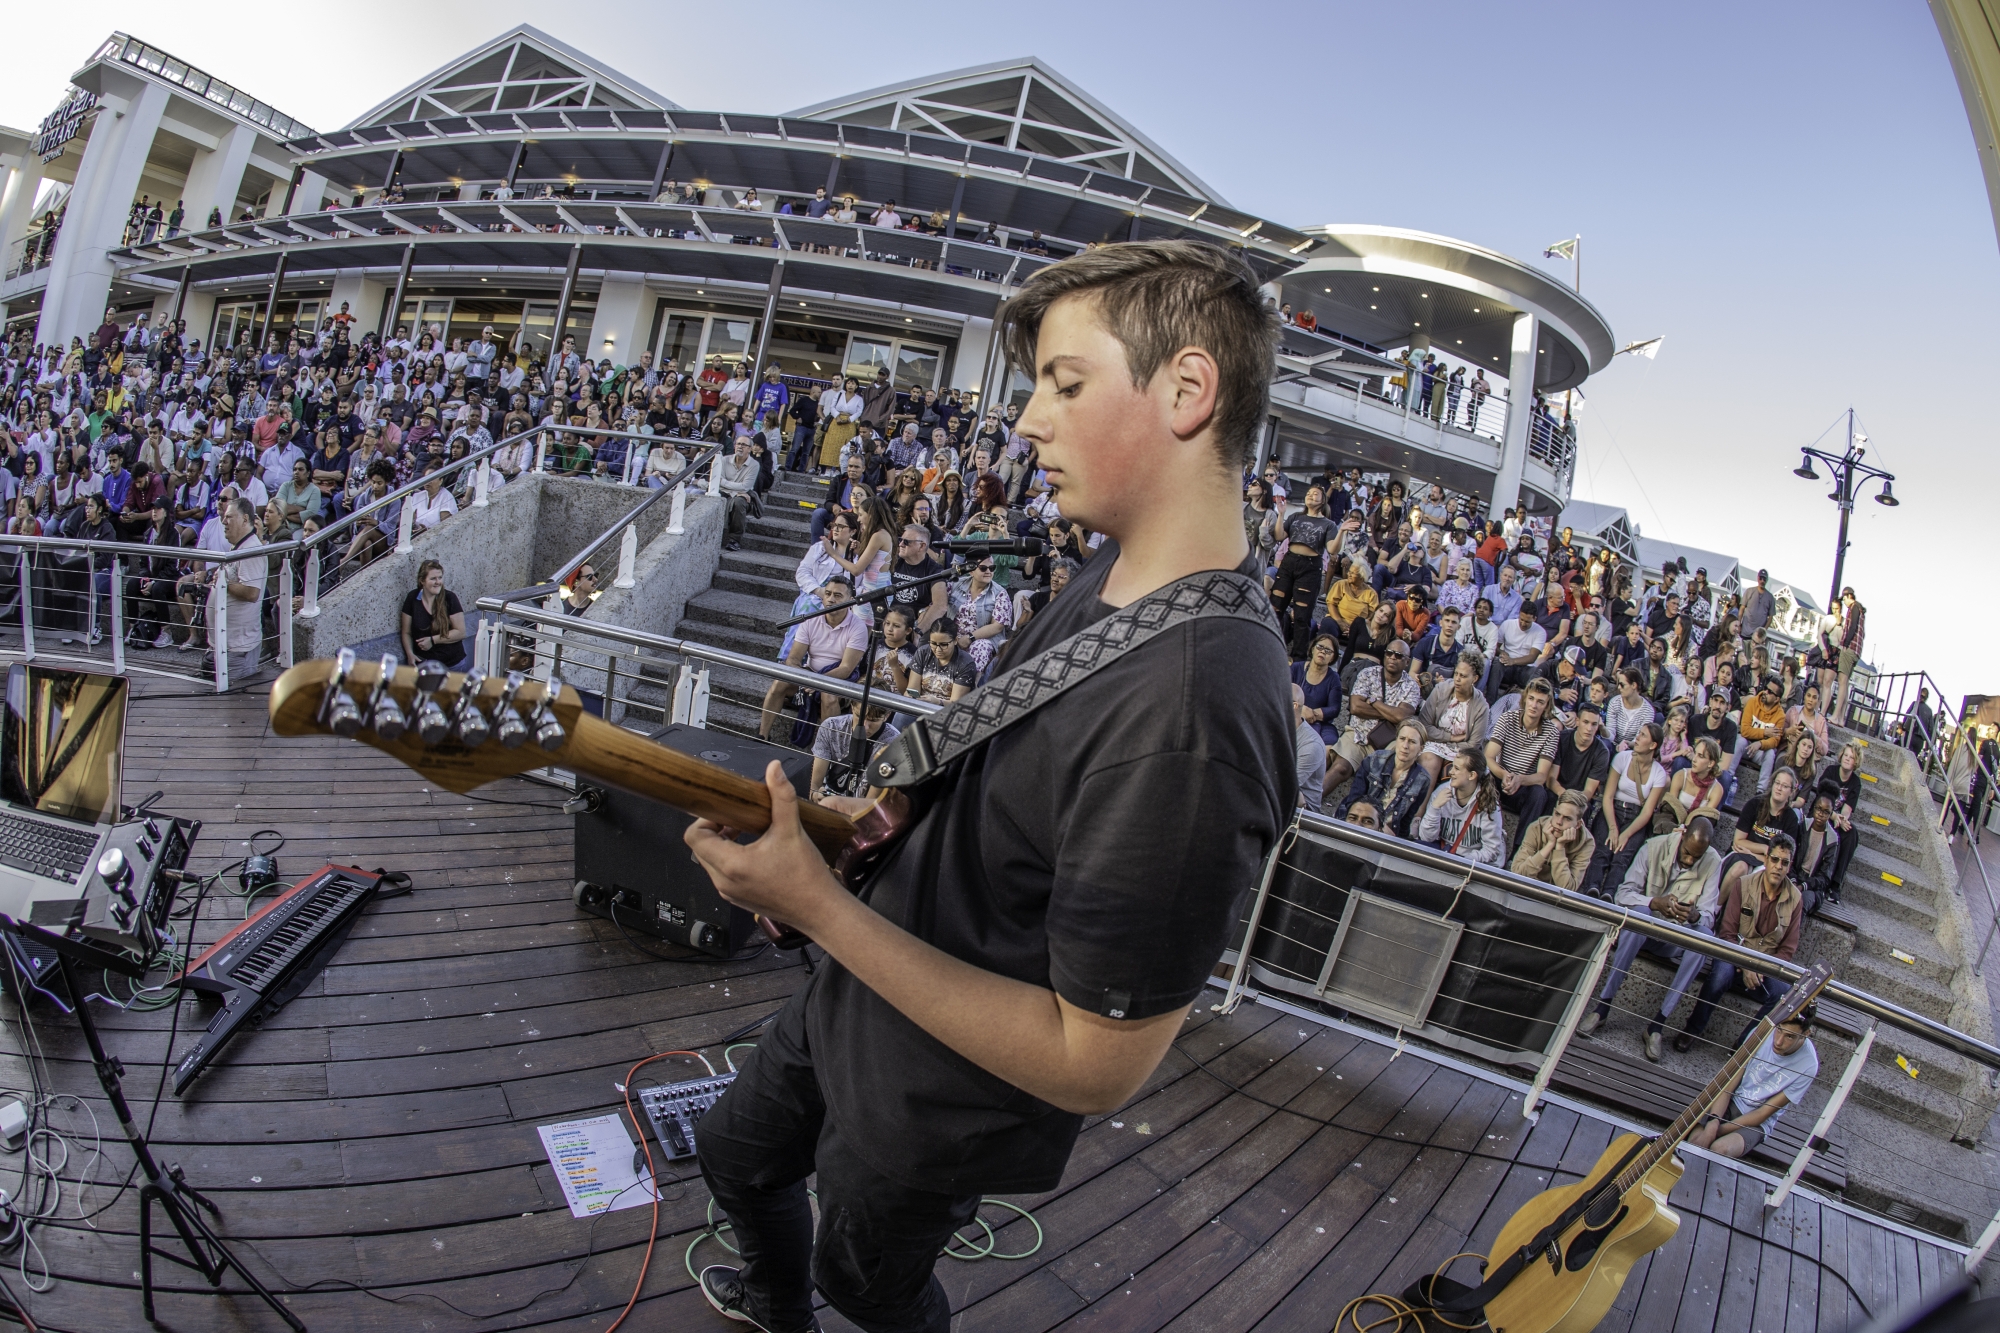 House Band guitarist performing at the V&A Waterfront Amphitheatre October 2022